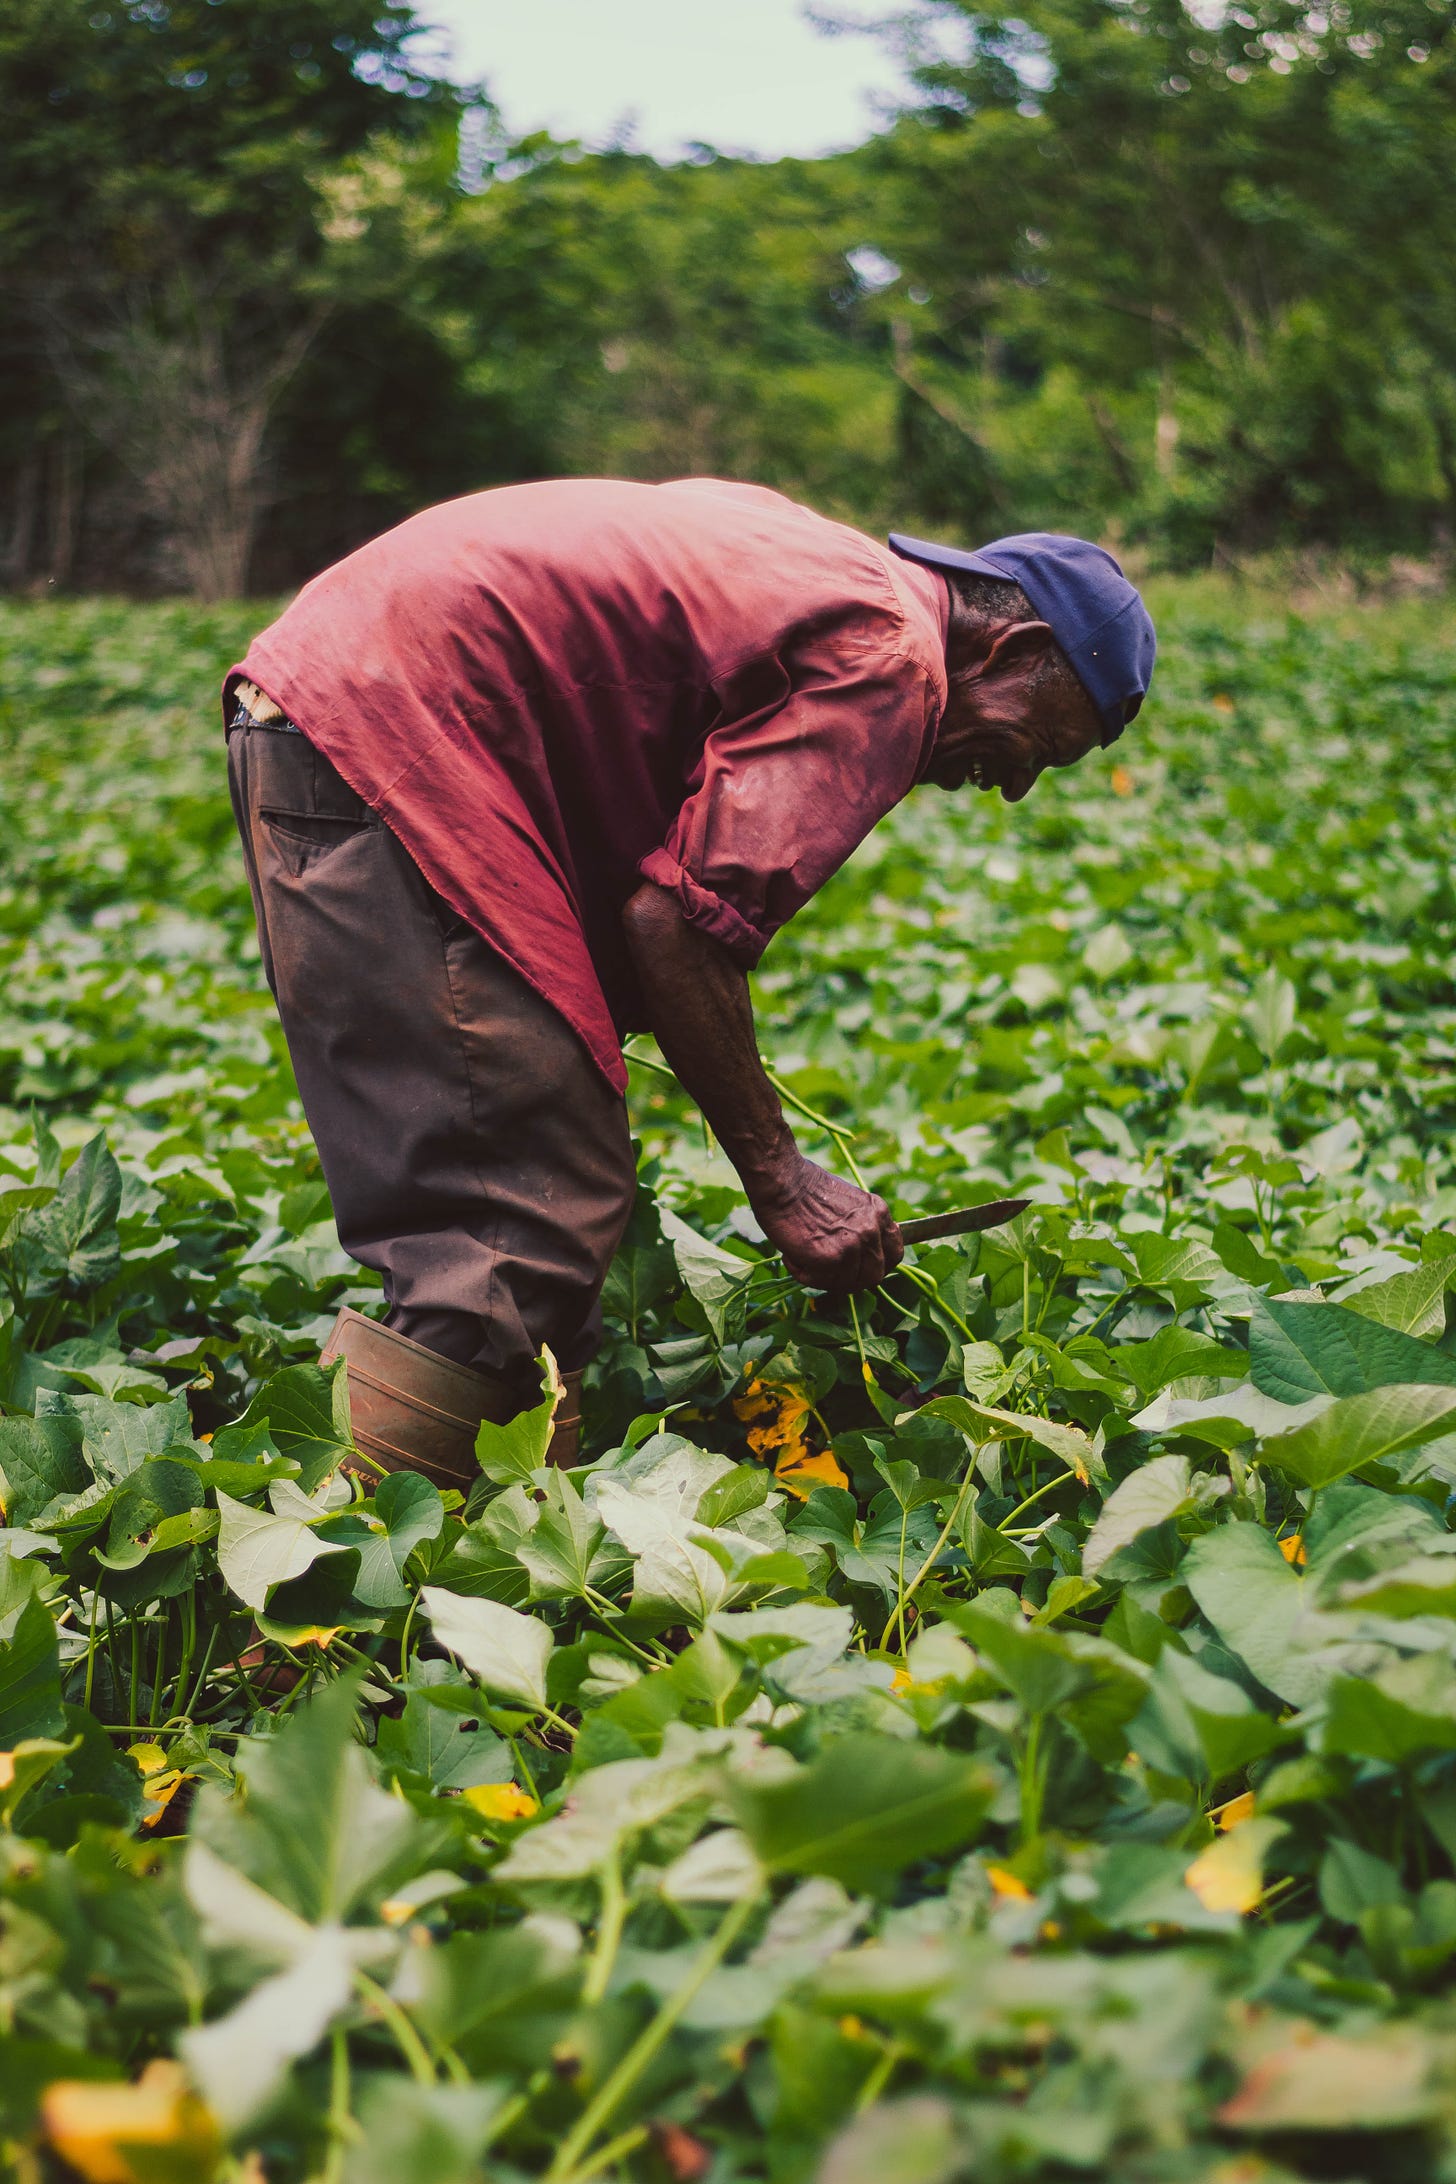 Older Black man bends over a field of leafy greens. He wears a red long sleeved shirt and a blue baseball cap. He holds greens and a small knife.